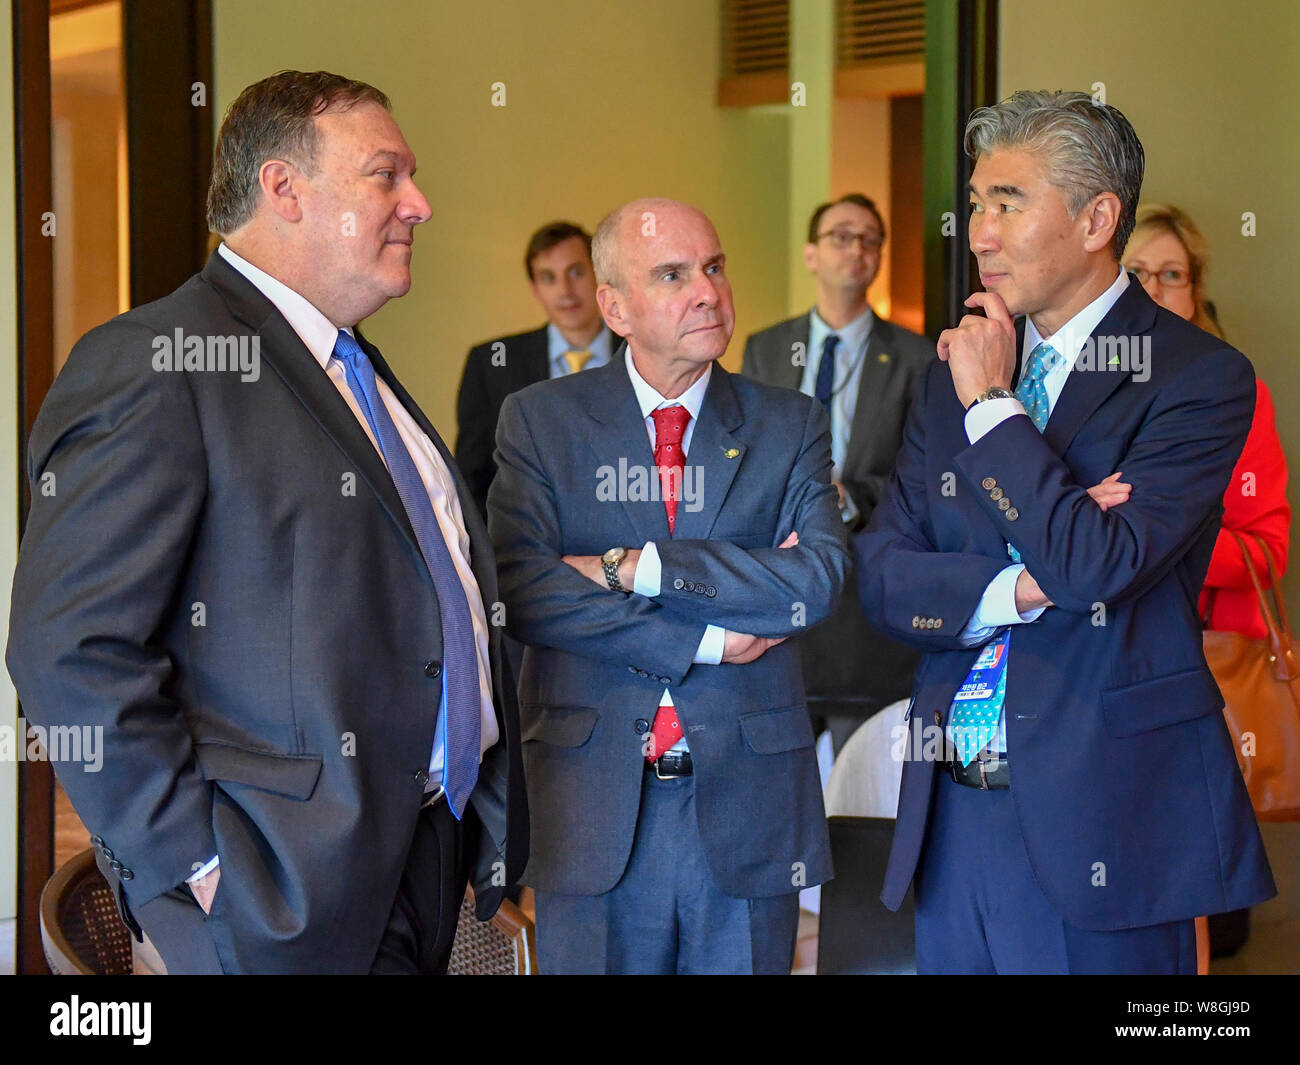 U.S. Secretary of State Mike Pompeo chat with U.S. Ambassador to the Philippines Sung Kim behind-the-scenes at the Singapore Summit in Singapore on Ju Stock Photo